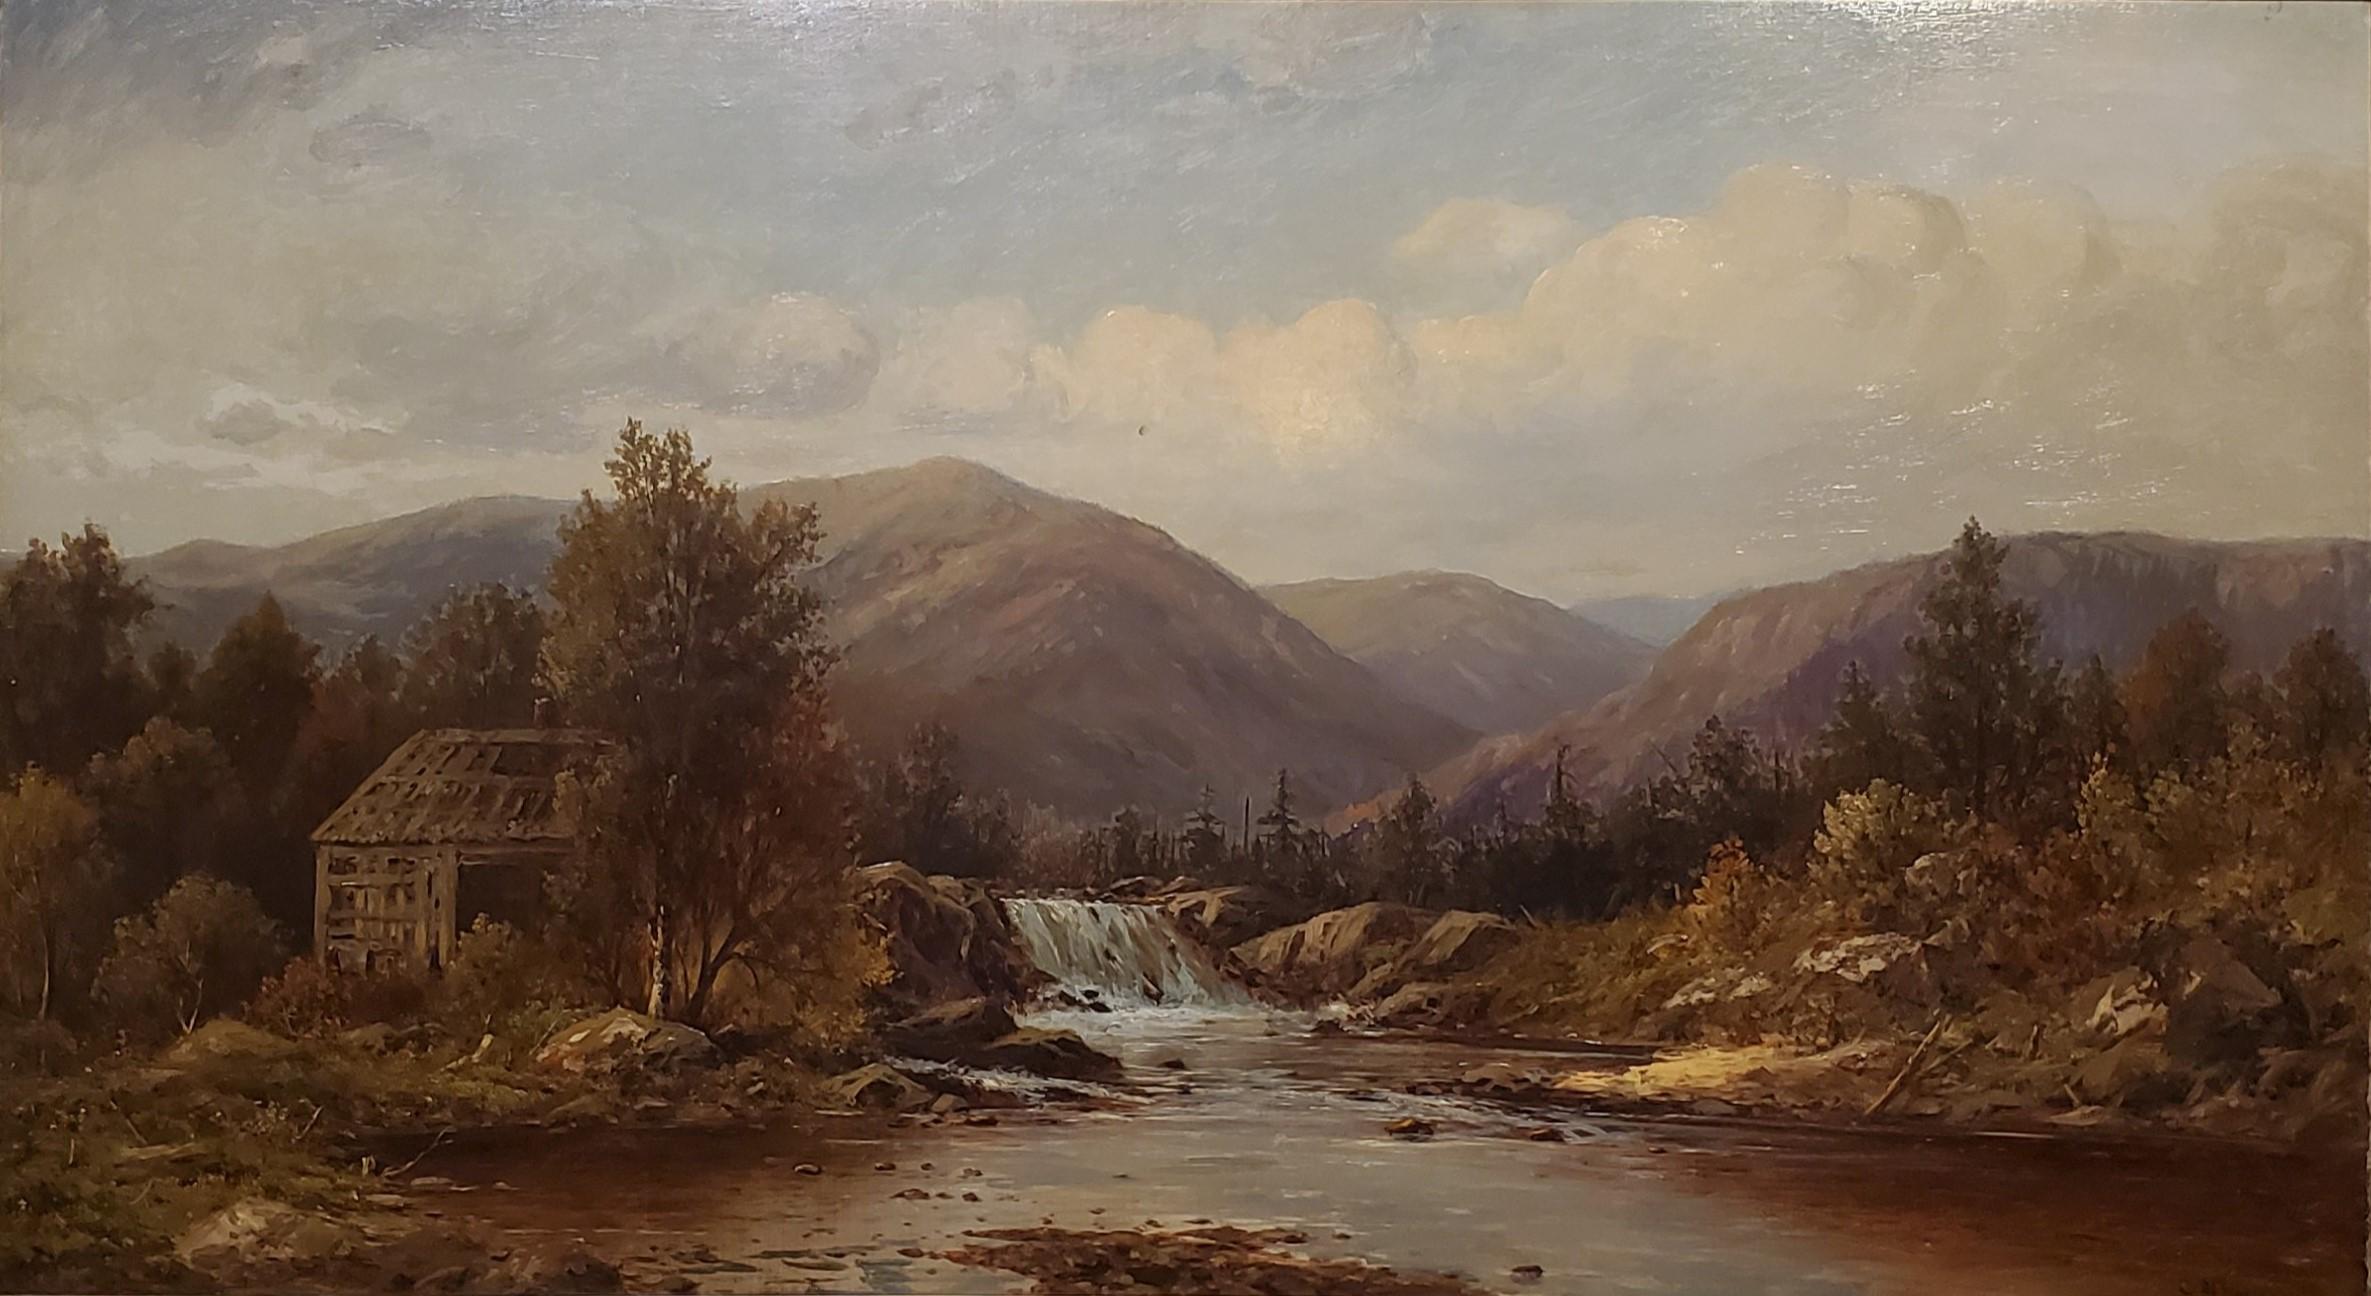 View of The Susquehanna River - Painting by Charles Wilson Knapp